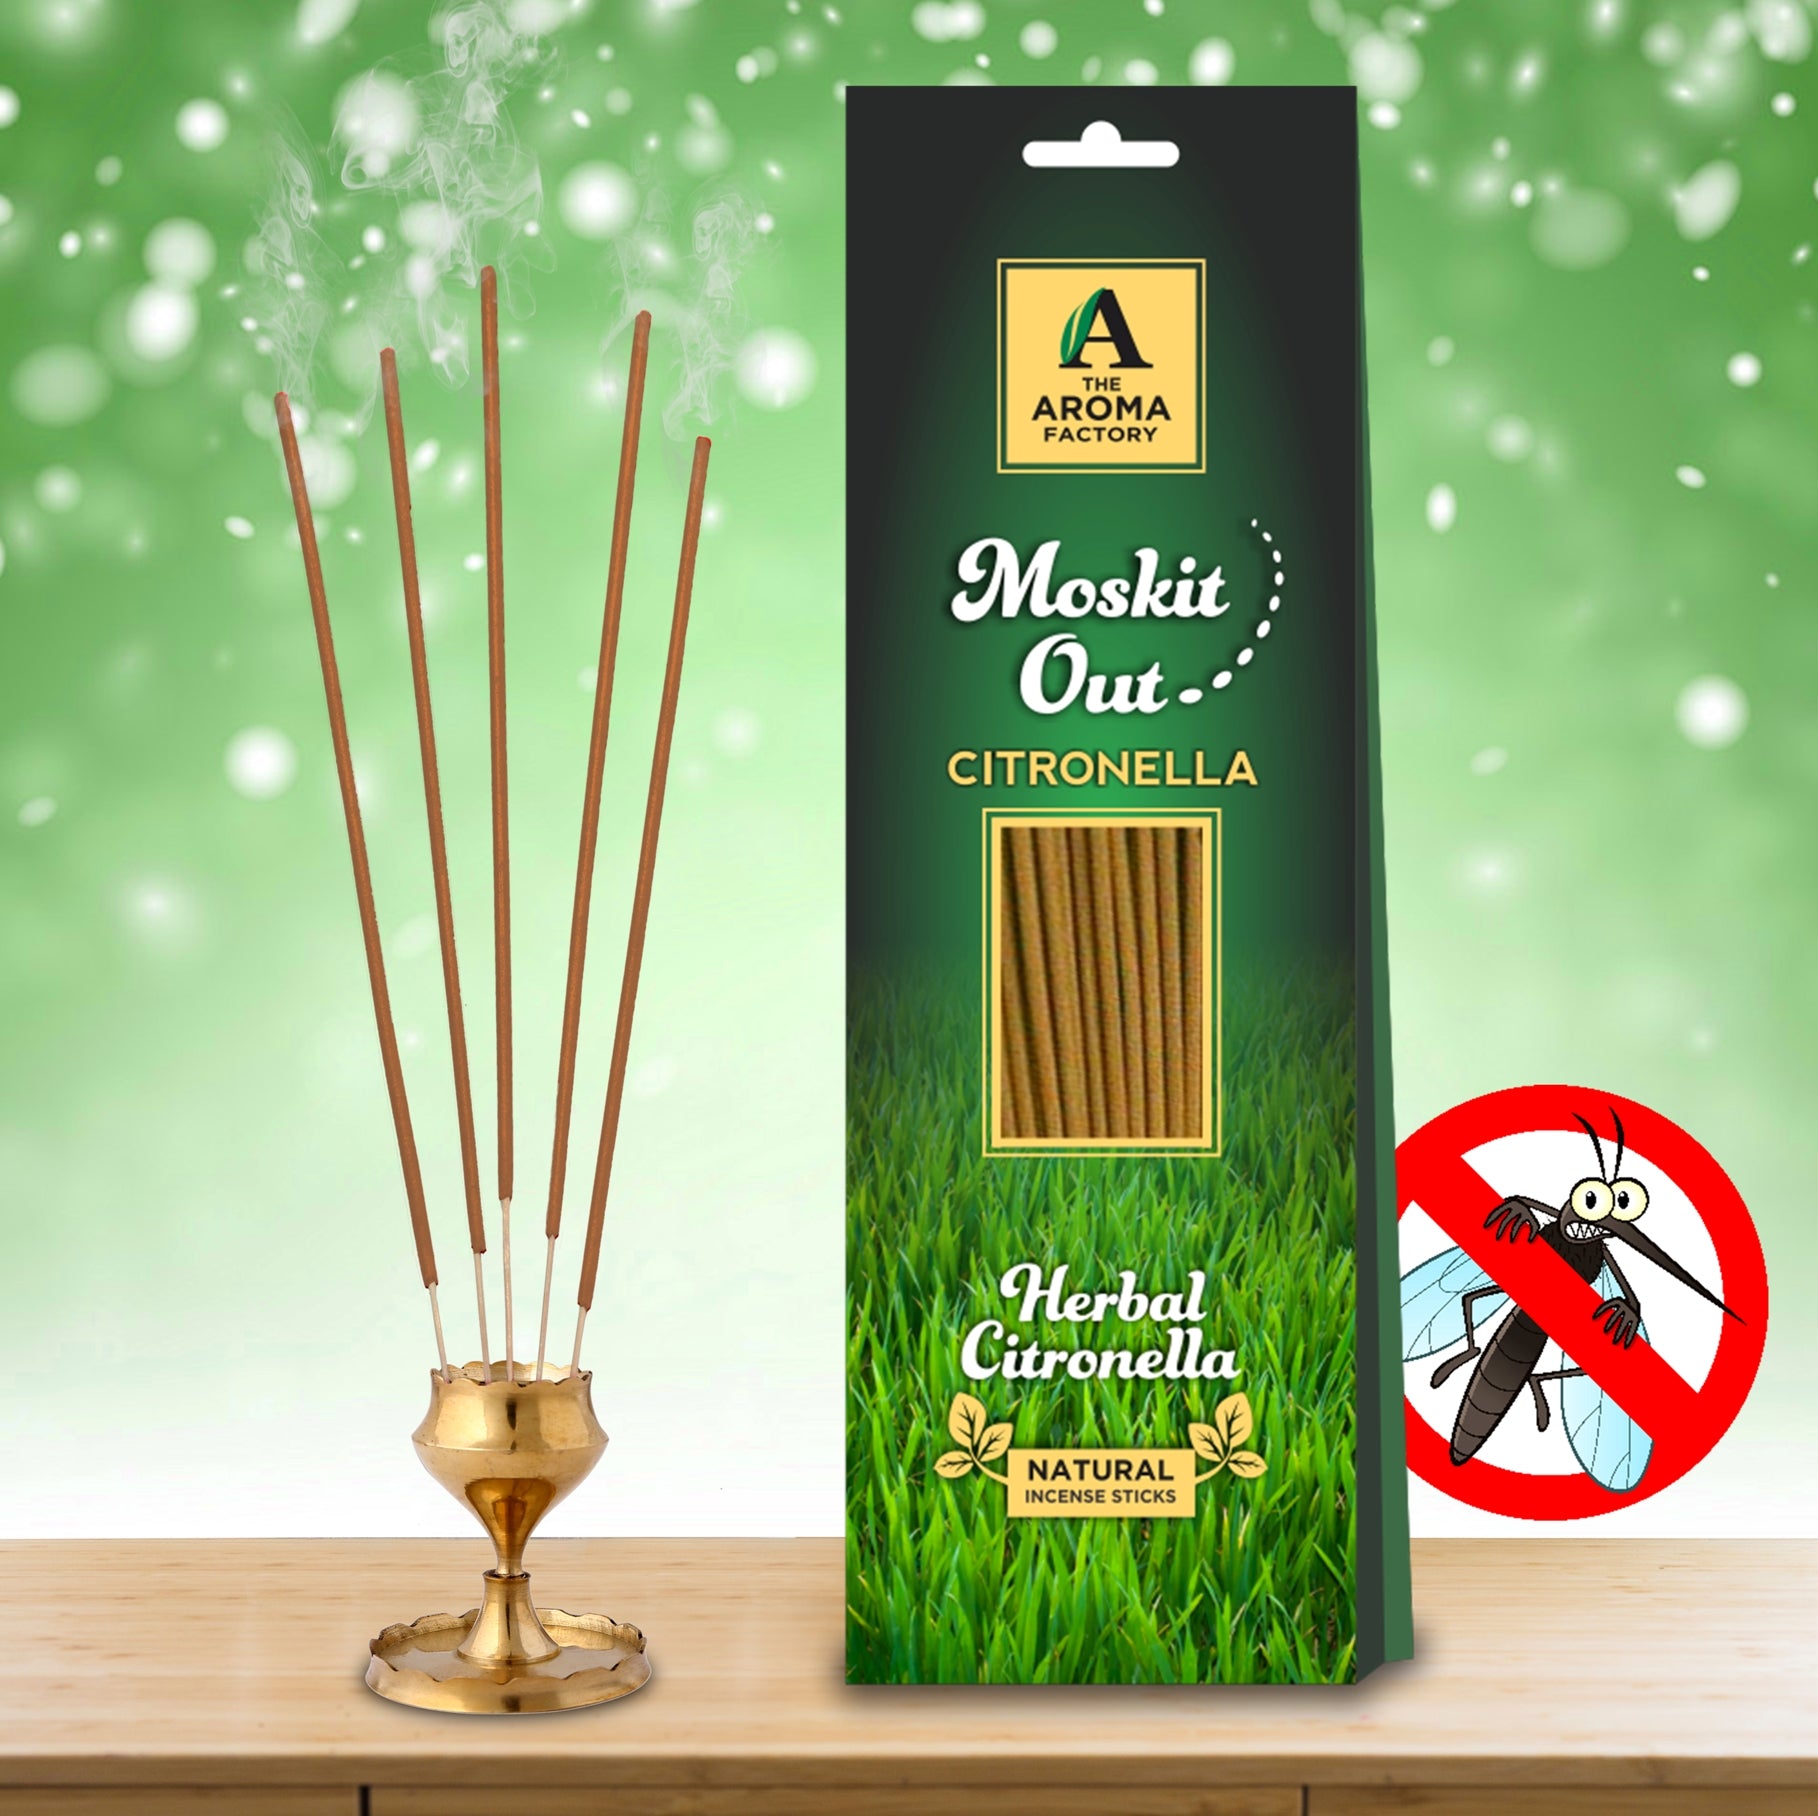 The Aroma Factory Moskit Out Citronella Agarbatti Incense Stick, No Charcoal & 100% Herbal (Pack of 30)